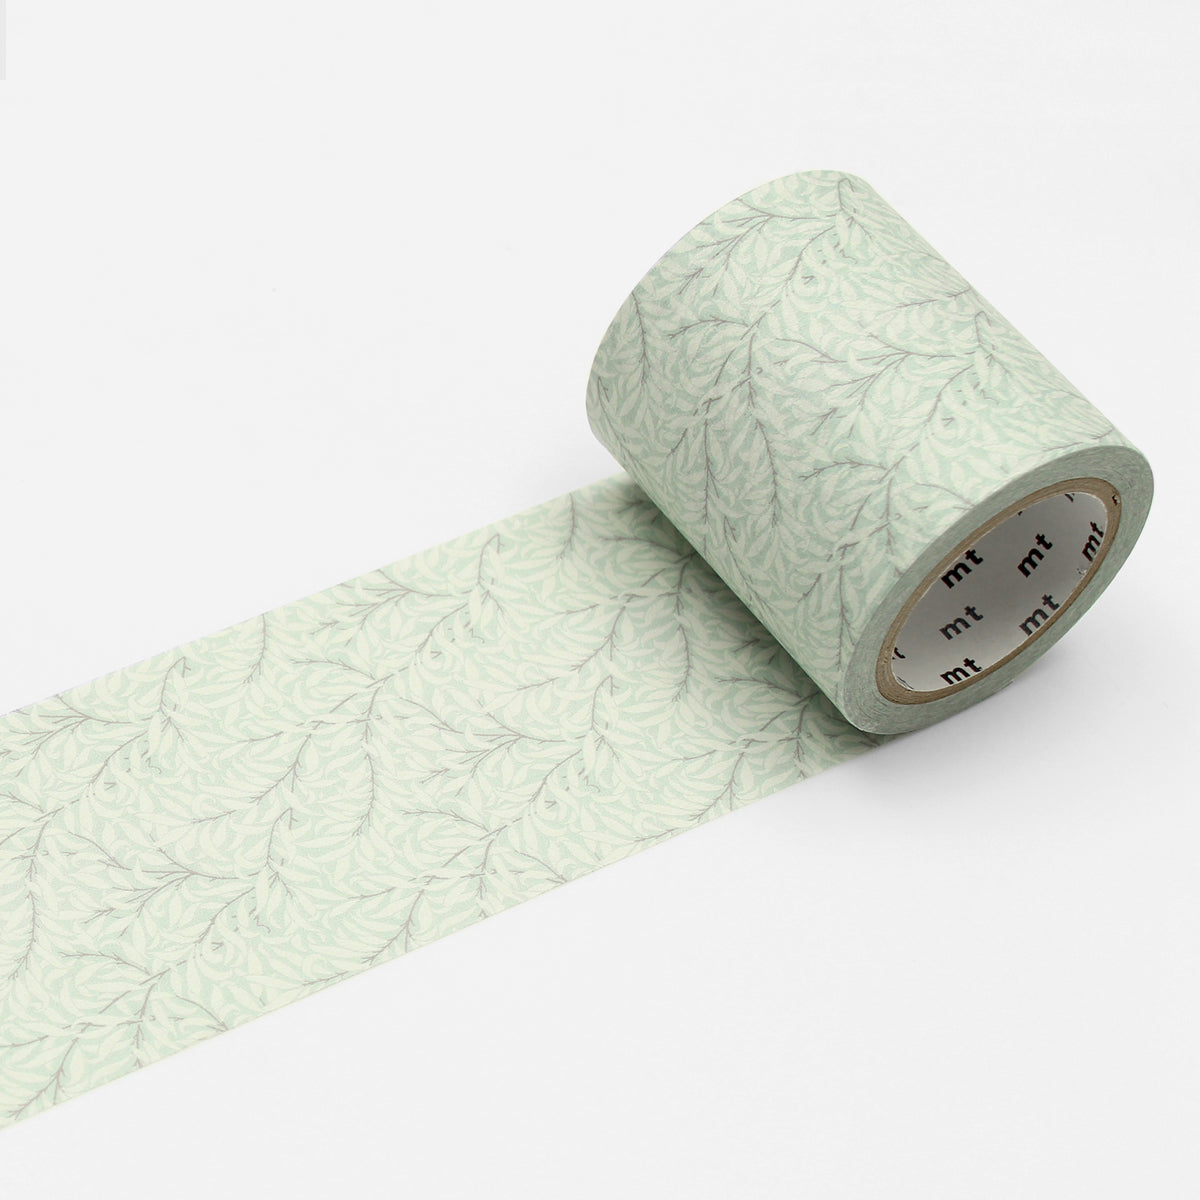 MT MASKING TAPE // WILLIAM MORRIS & CO. PURE WILLOW BOUGH EGGSHELL:CHALK